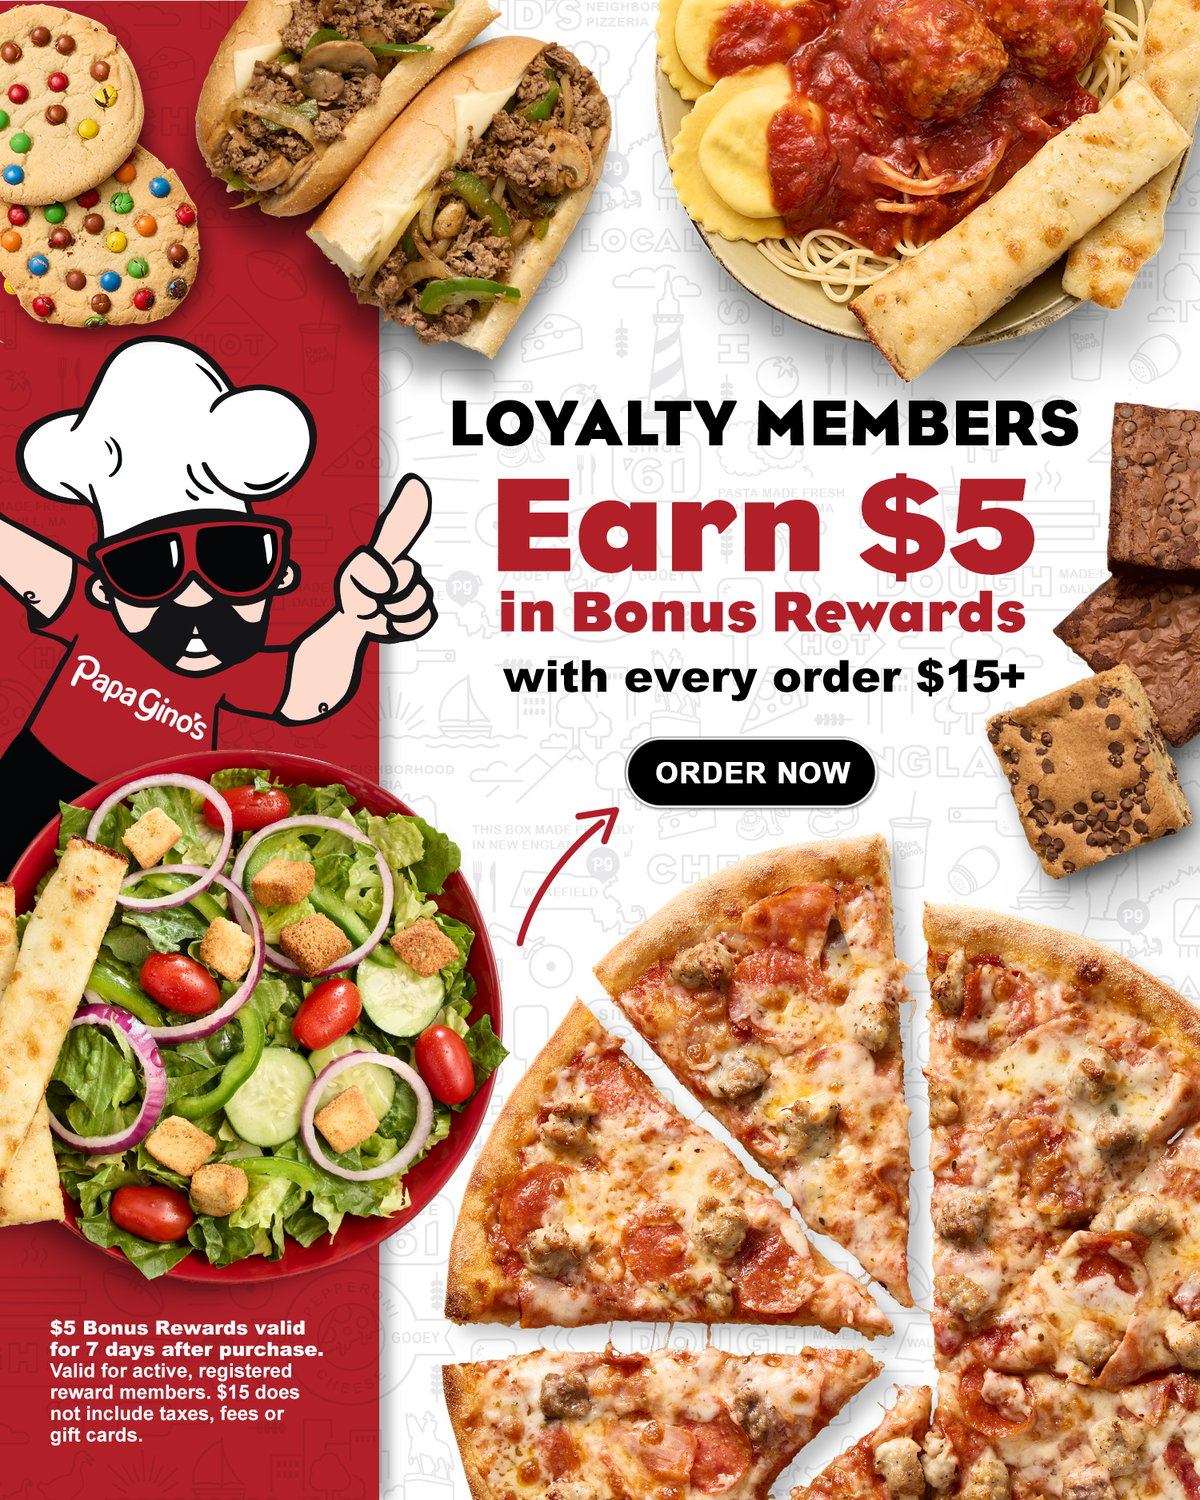 Get rewarded for loving pizza and being loyal - Papa Gino's